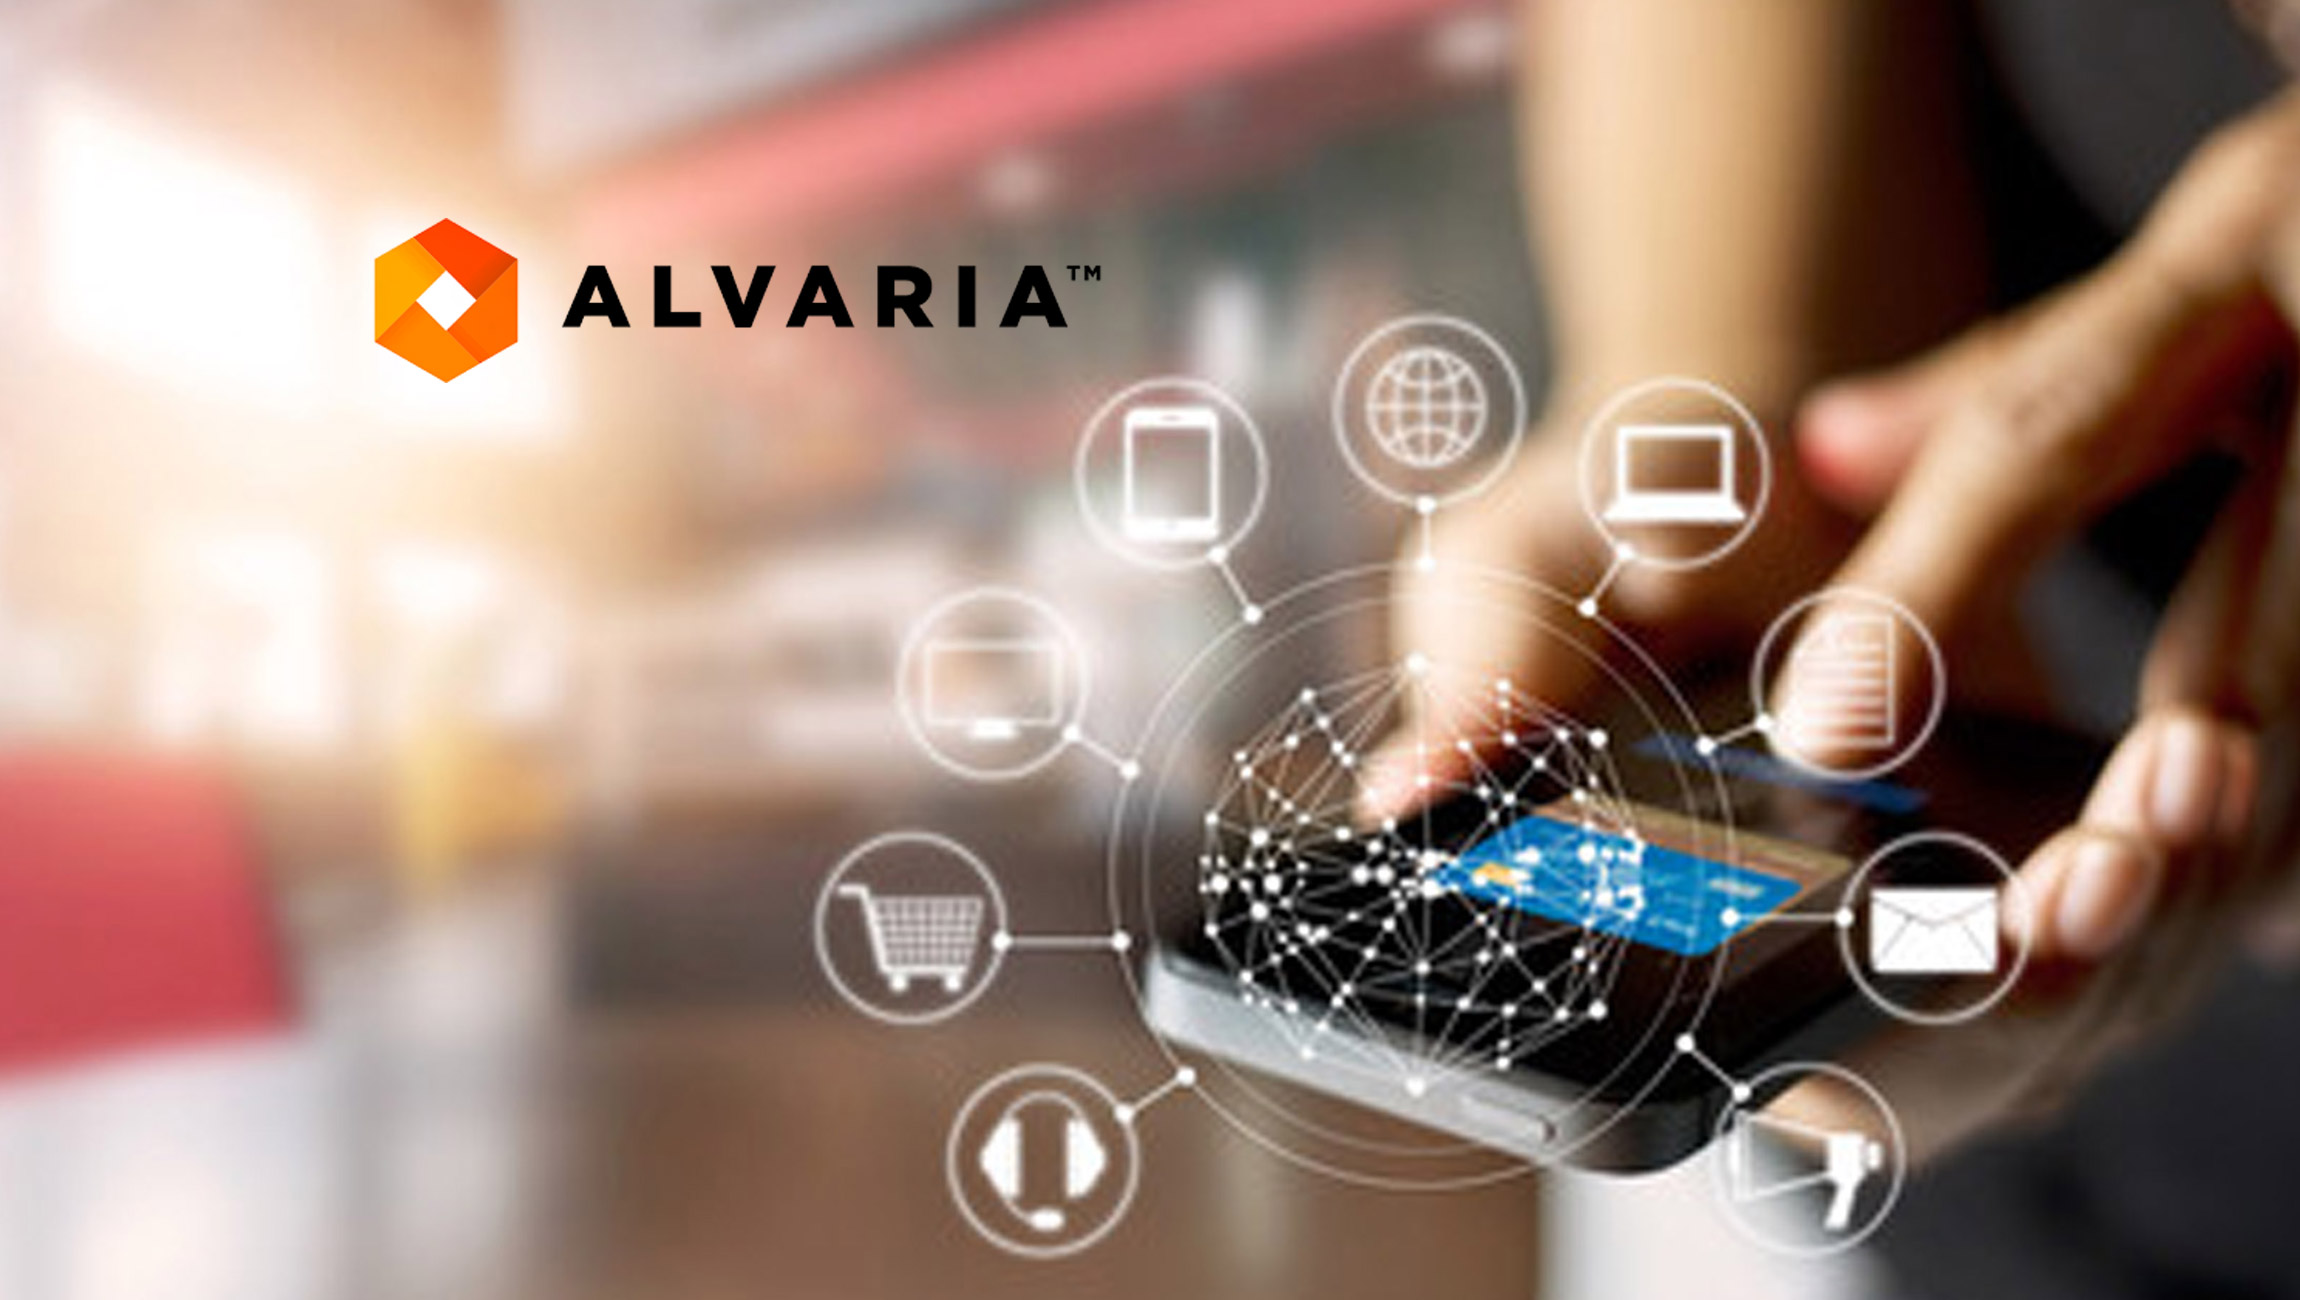 Alvaria-Applauded-by-Frost-_-Sullivan-for-Enabling-Compliant-Outbound-Dialing-and-Debt-Collection-with-Its-Omnichannel-Outbound-Solutions